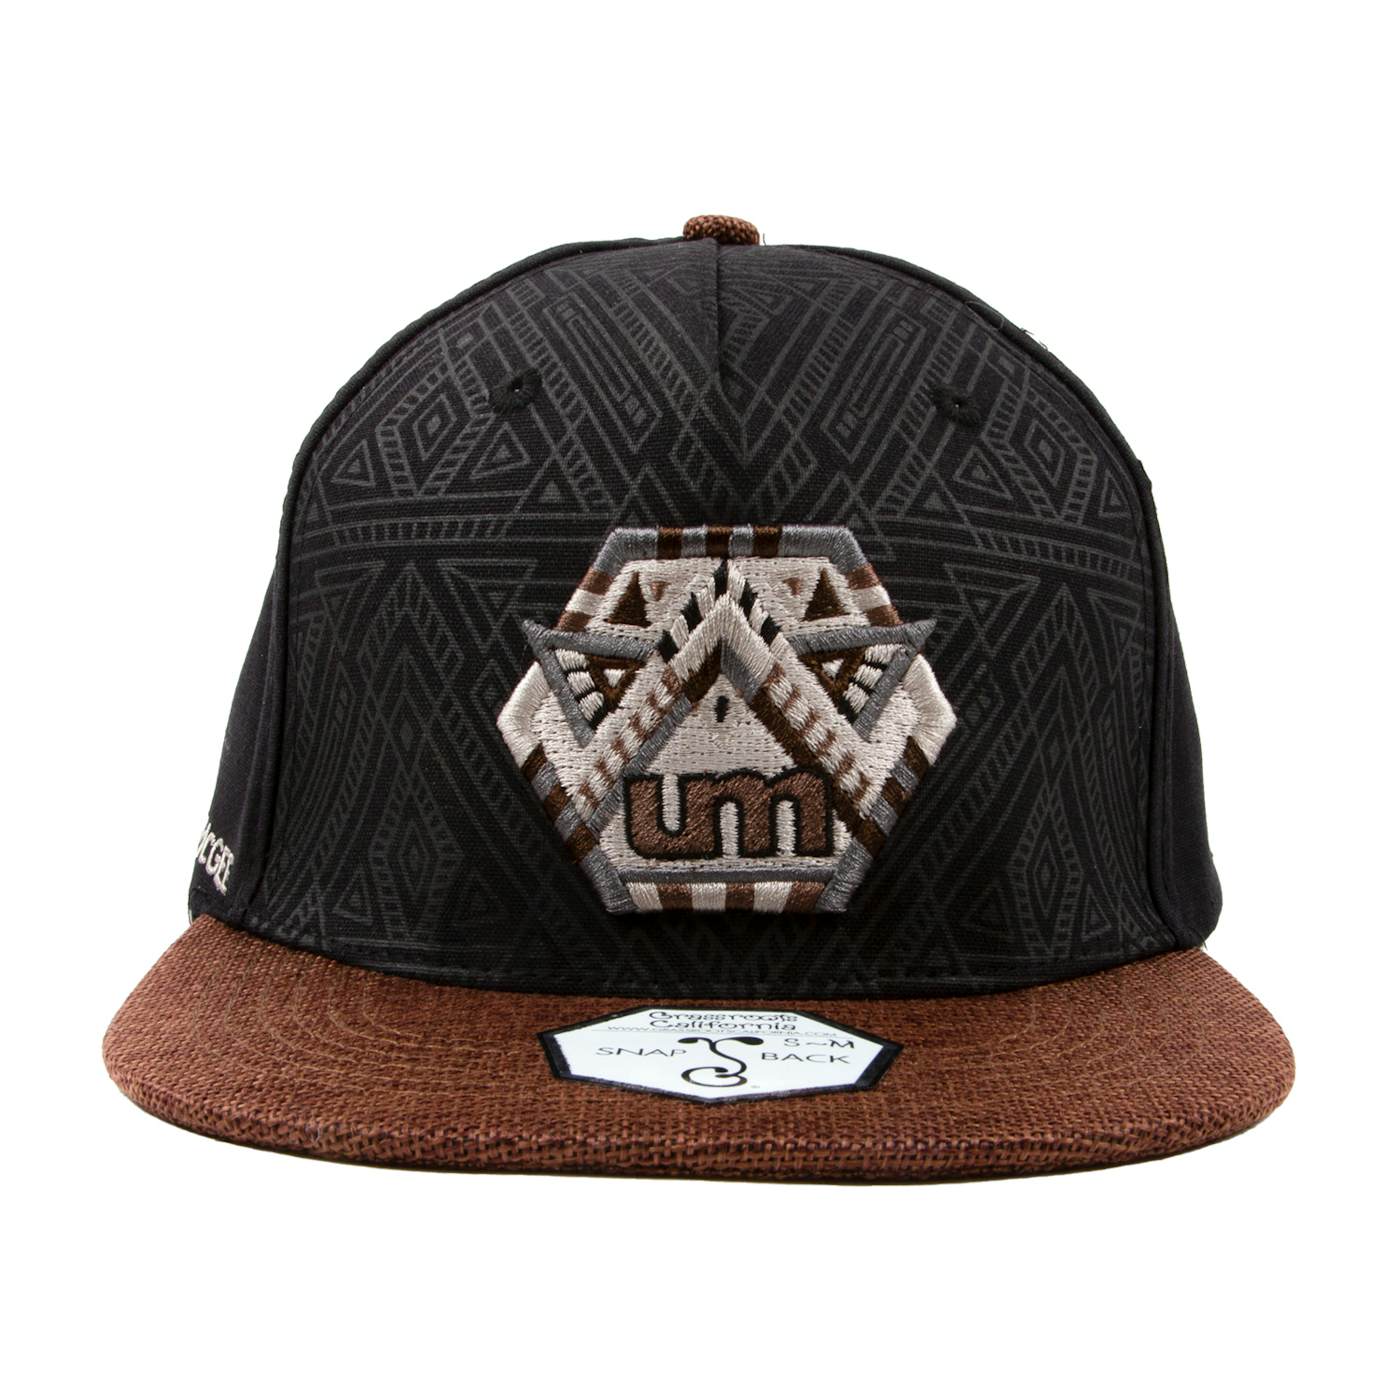 Umphrey's McGee Tribal Grassroots Snapback w/ Embroidered Patch